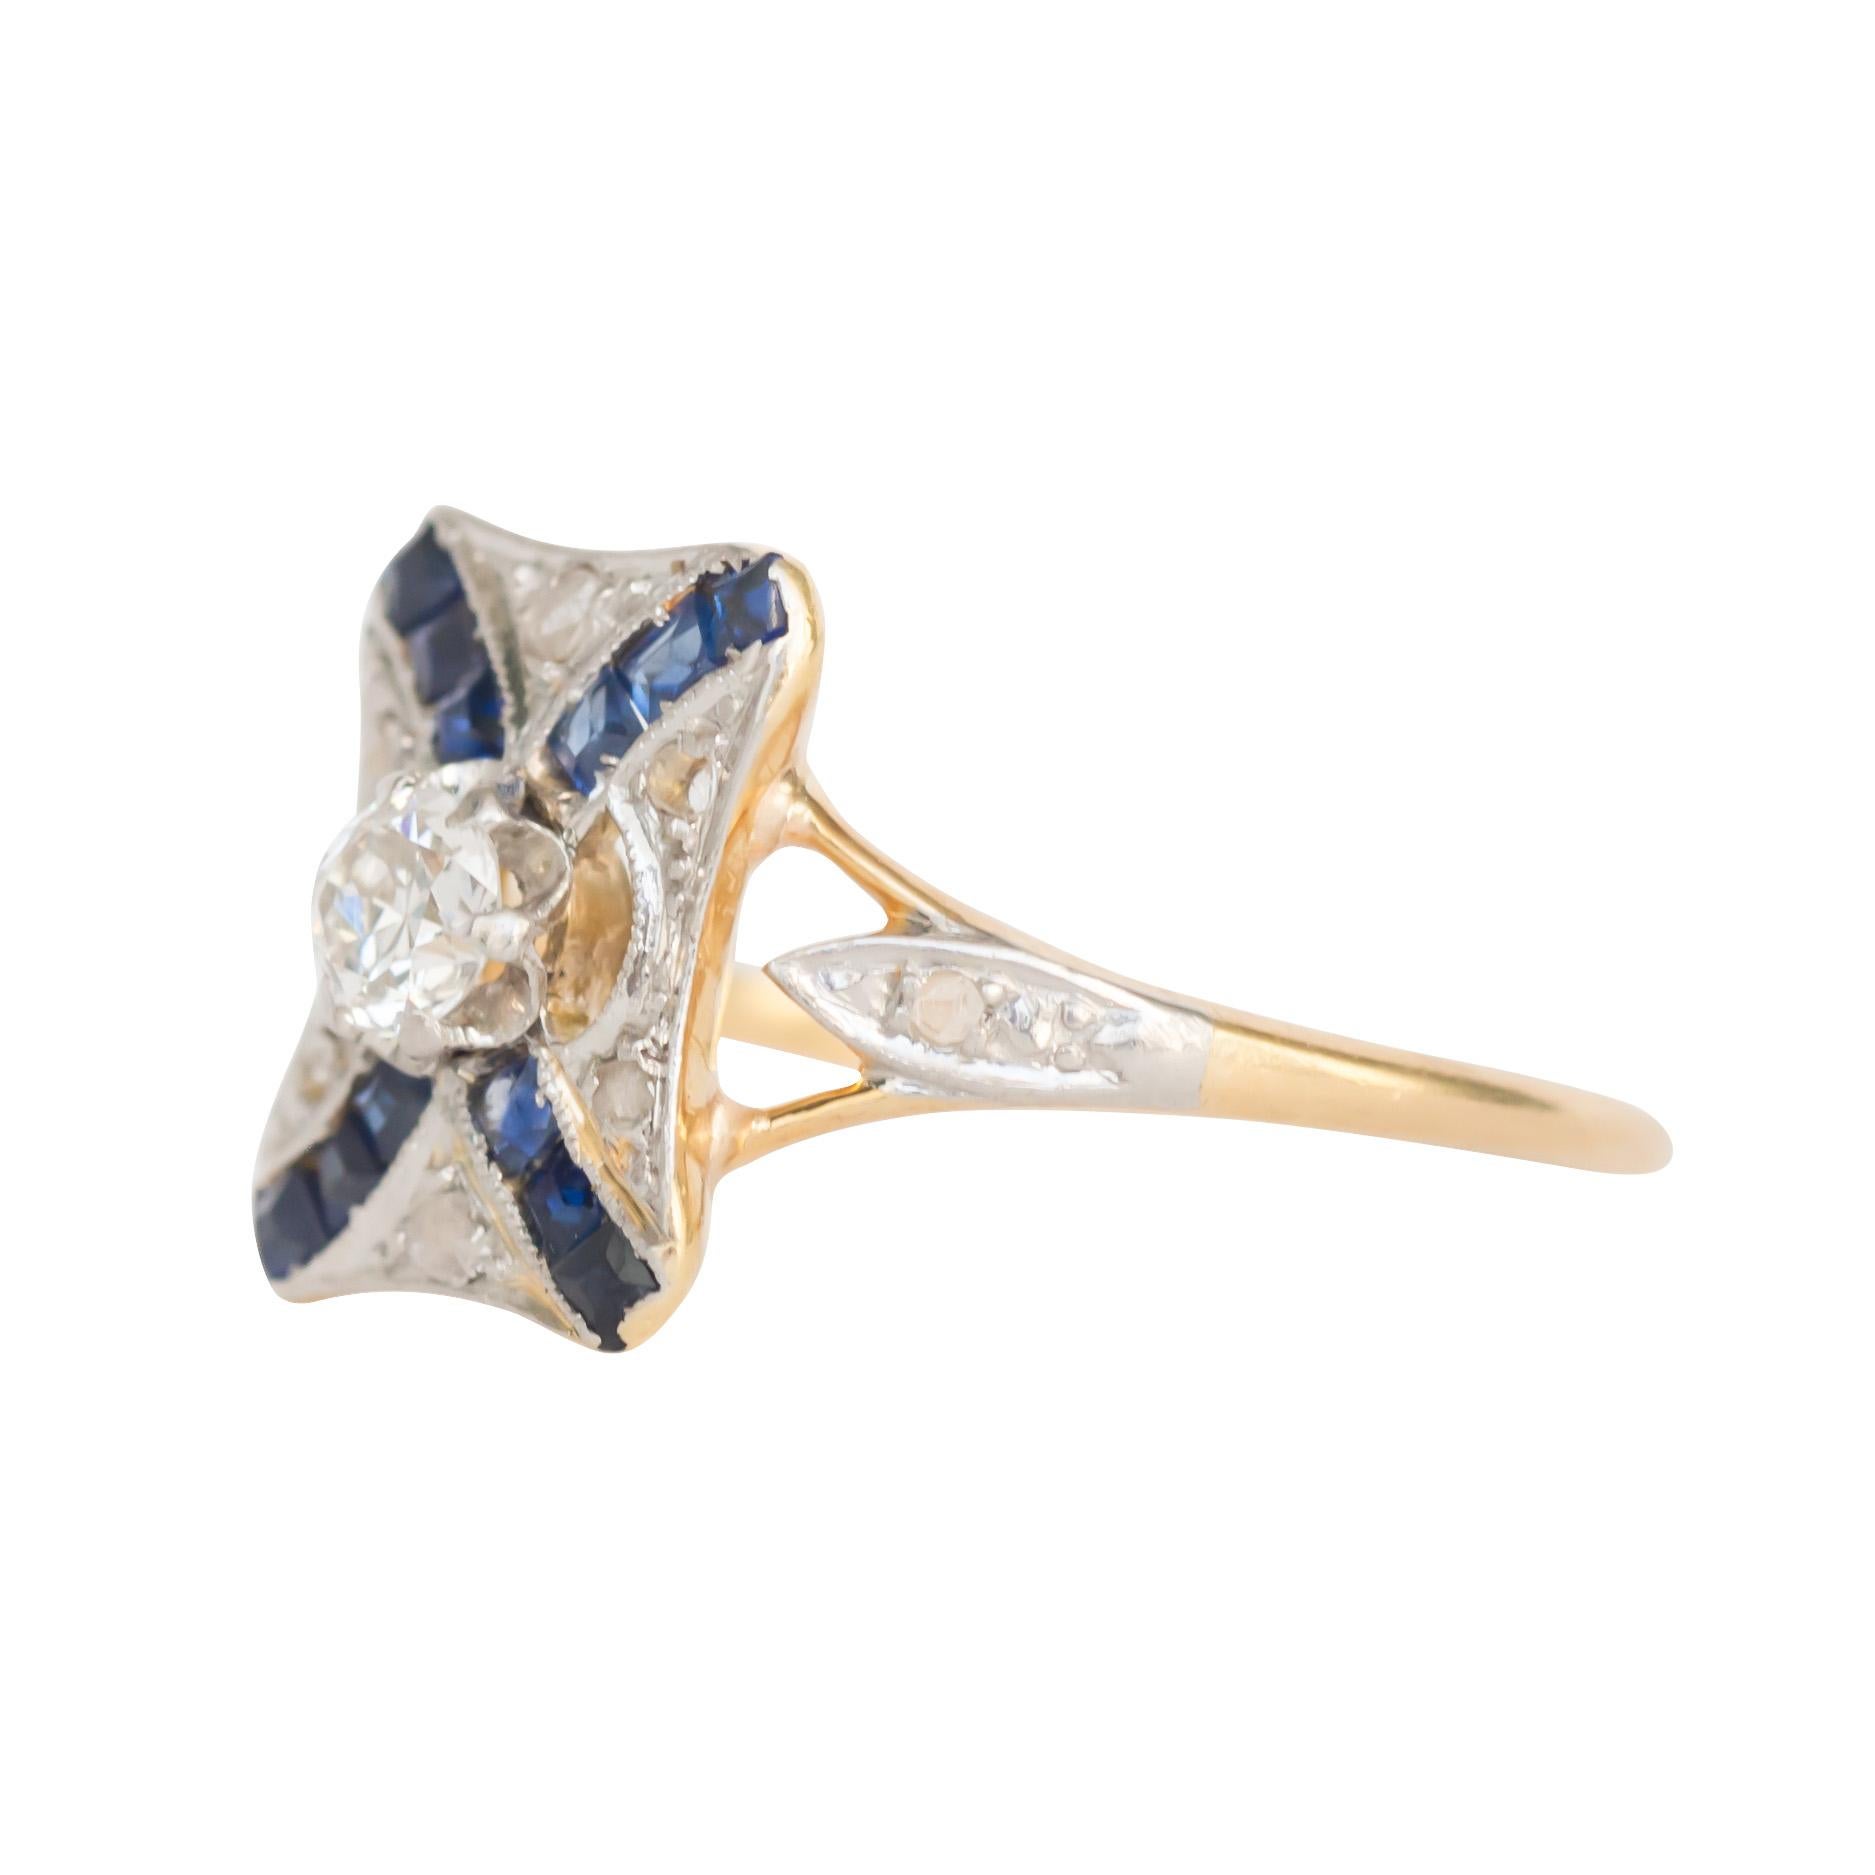 Ring Size: 5.5
Metal Type: 14 karat Yellow Gold & Platinum  [Hallmarked, and Tested]
Weight:  2.2 grams

Diamond Details:
Weight: .30 carat, total weight
Cut: Old European Brilliant
Color: G
Clarity: VS

Sapphire  Details:
Weight: .20 carat, total